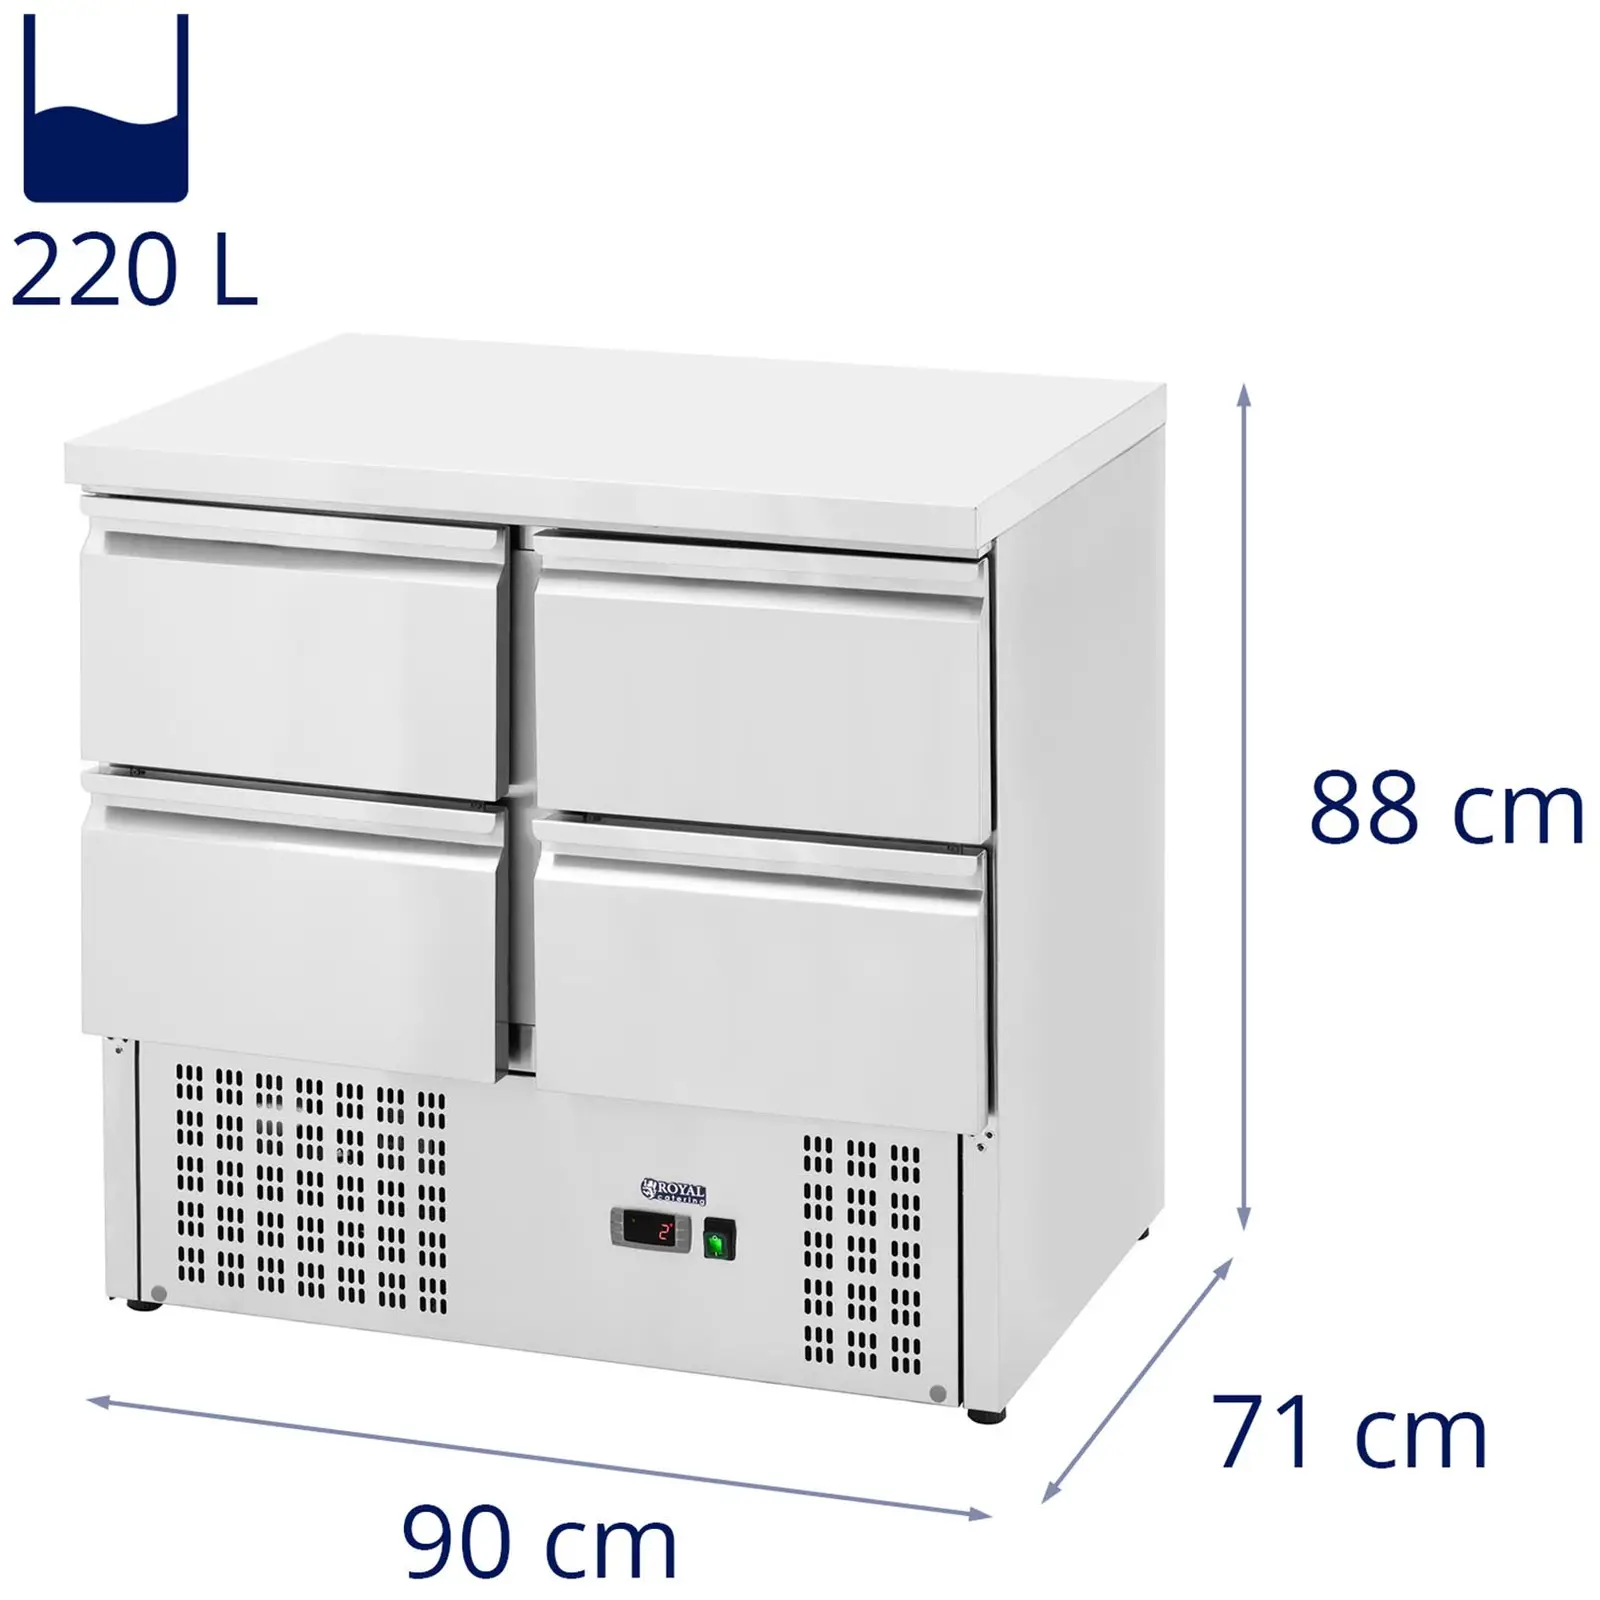 Cooling Table - Royal Catering - 220 L - 4 drawers - 90 x 71 cm